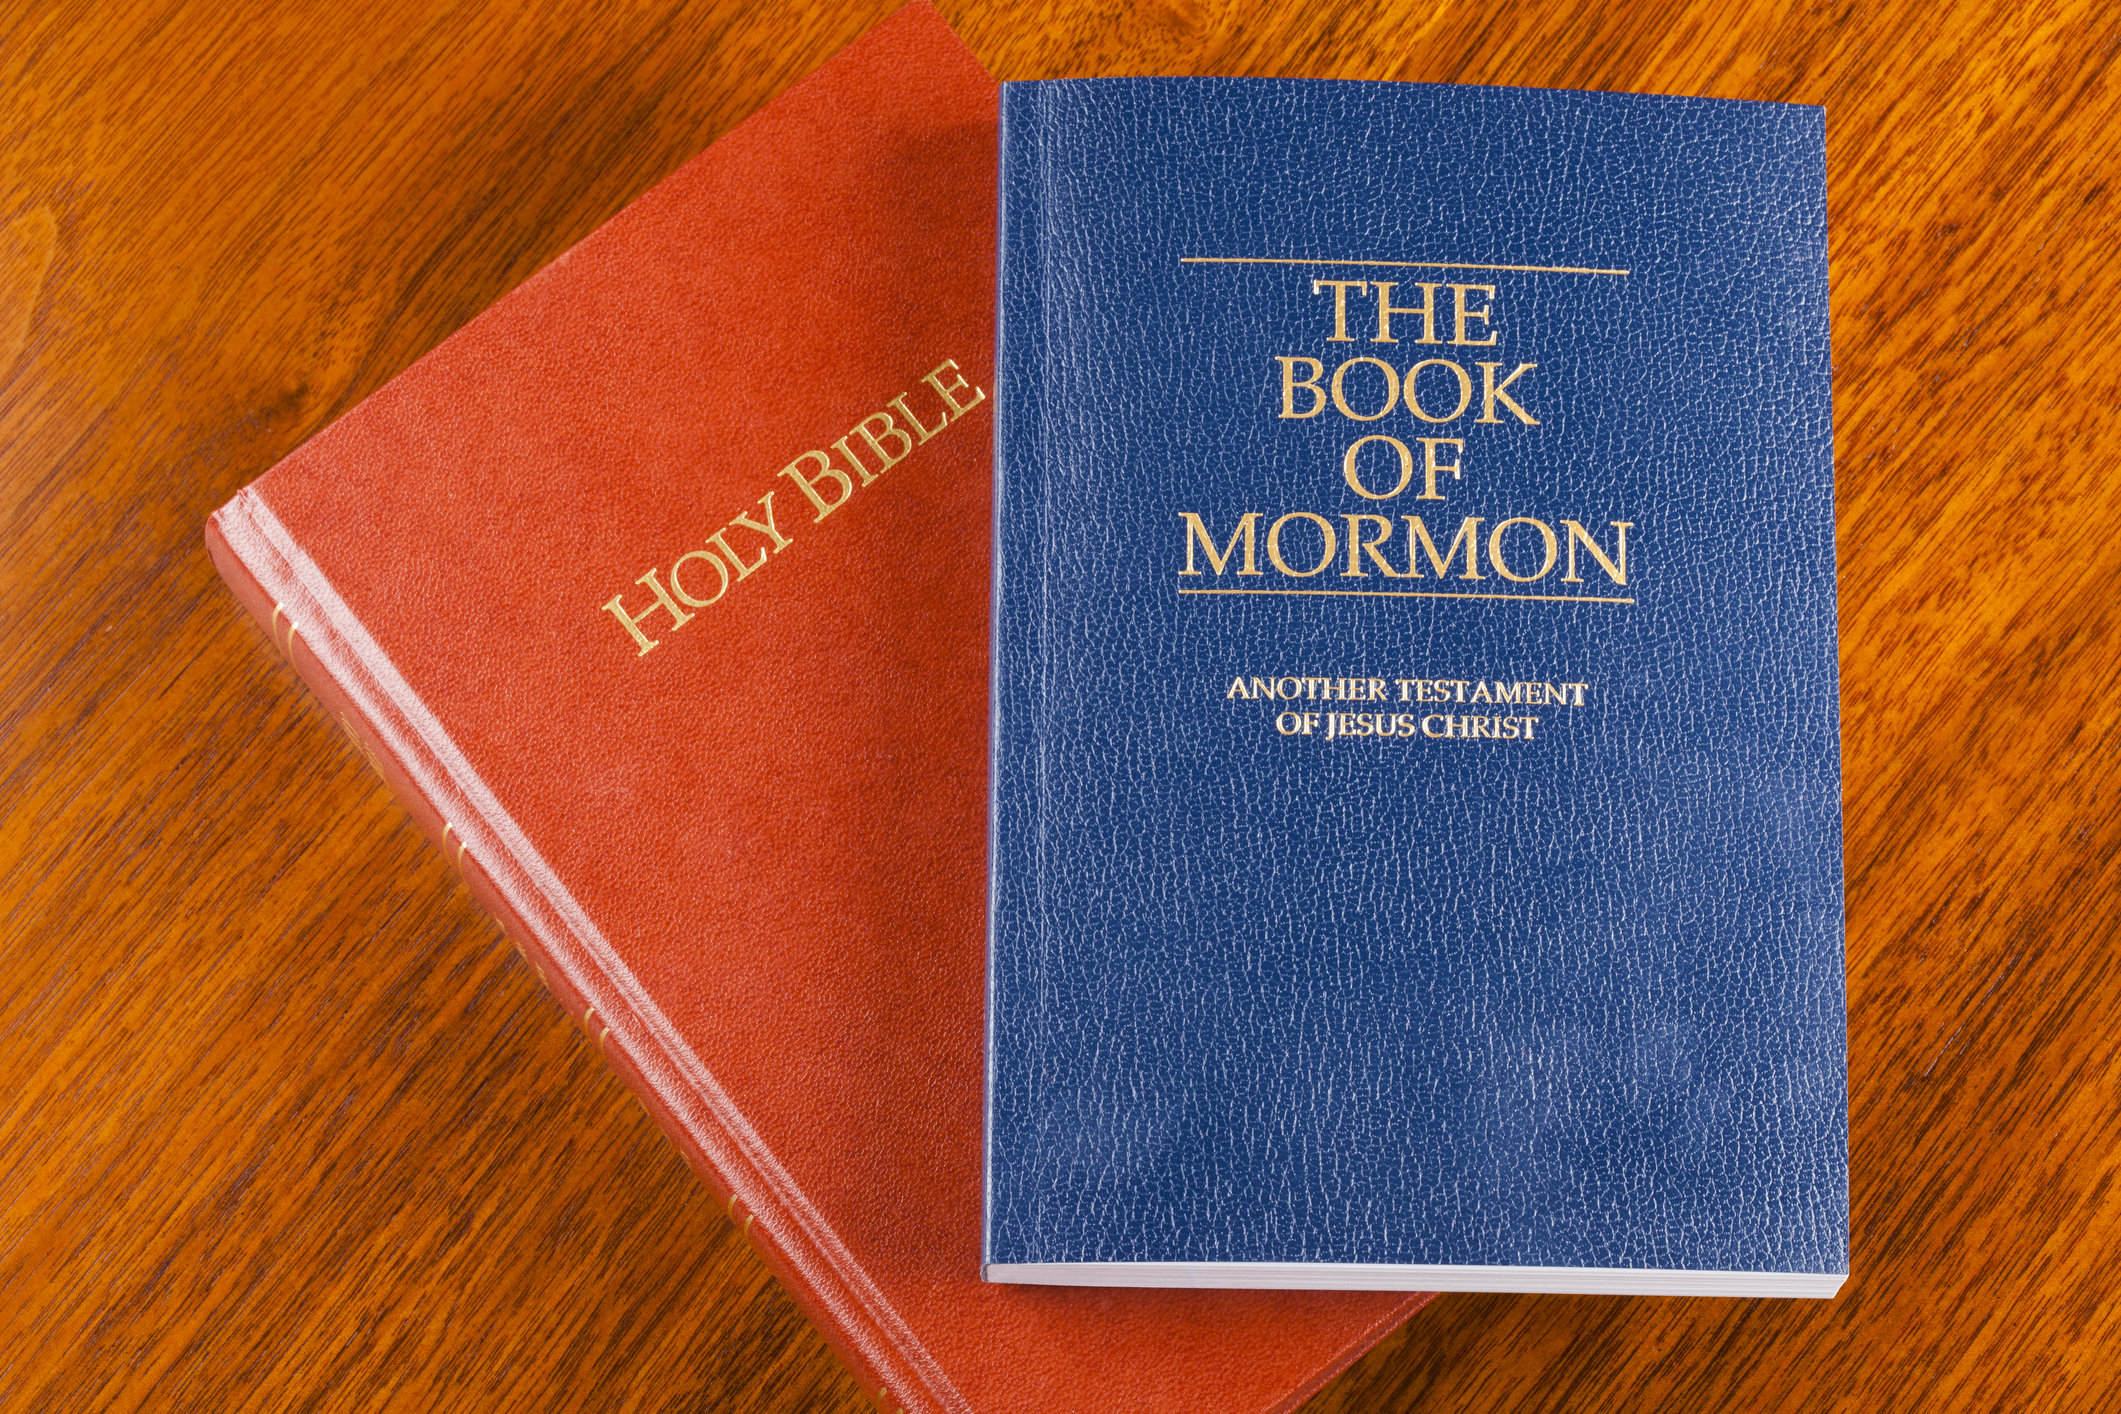 The Book of Mormon and Catholic Bible on a table.